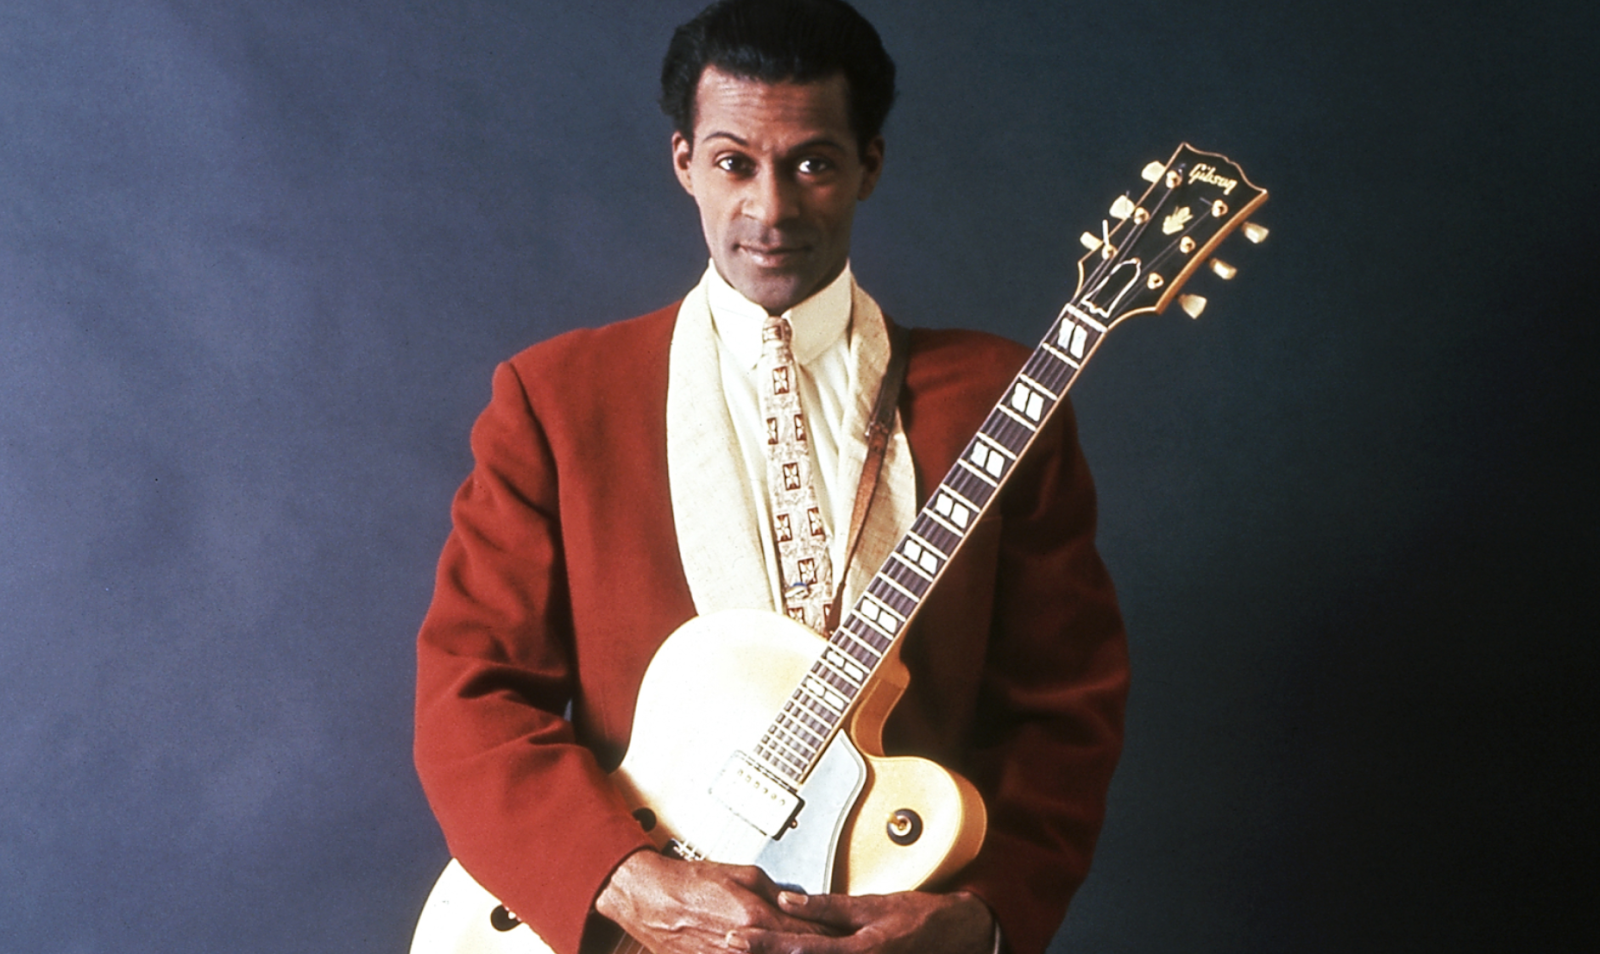 Chuck Berry Best Guitarists of All Time